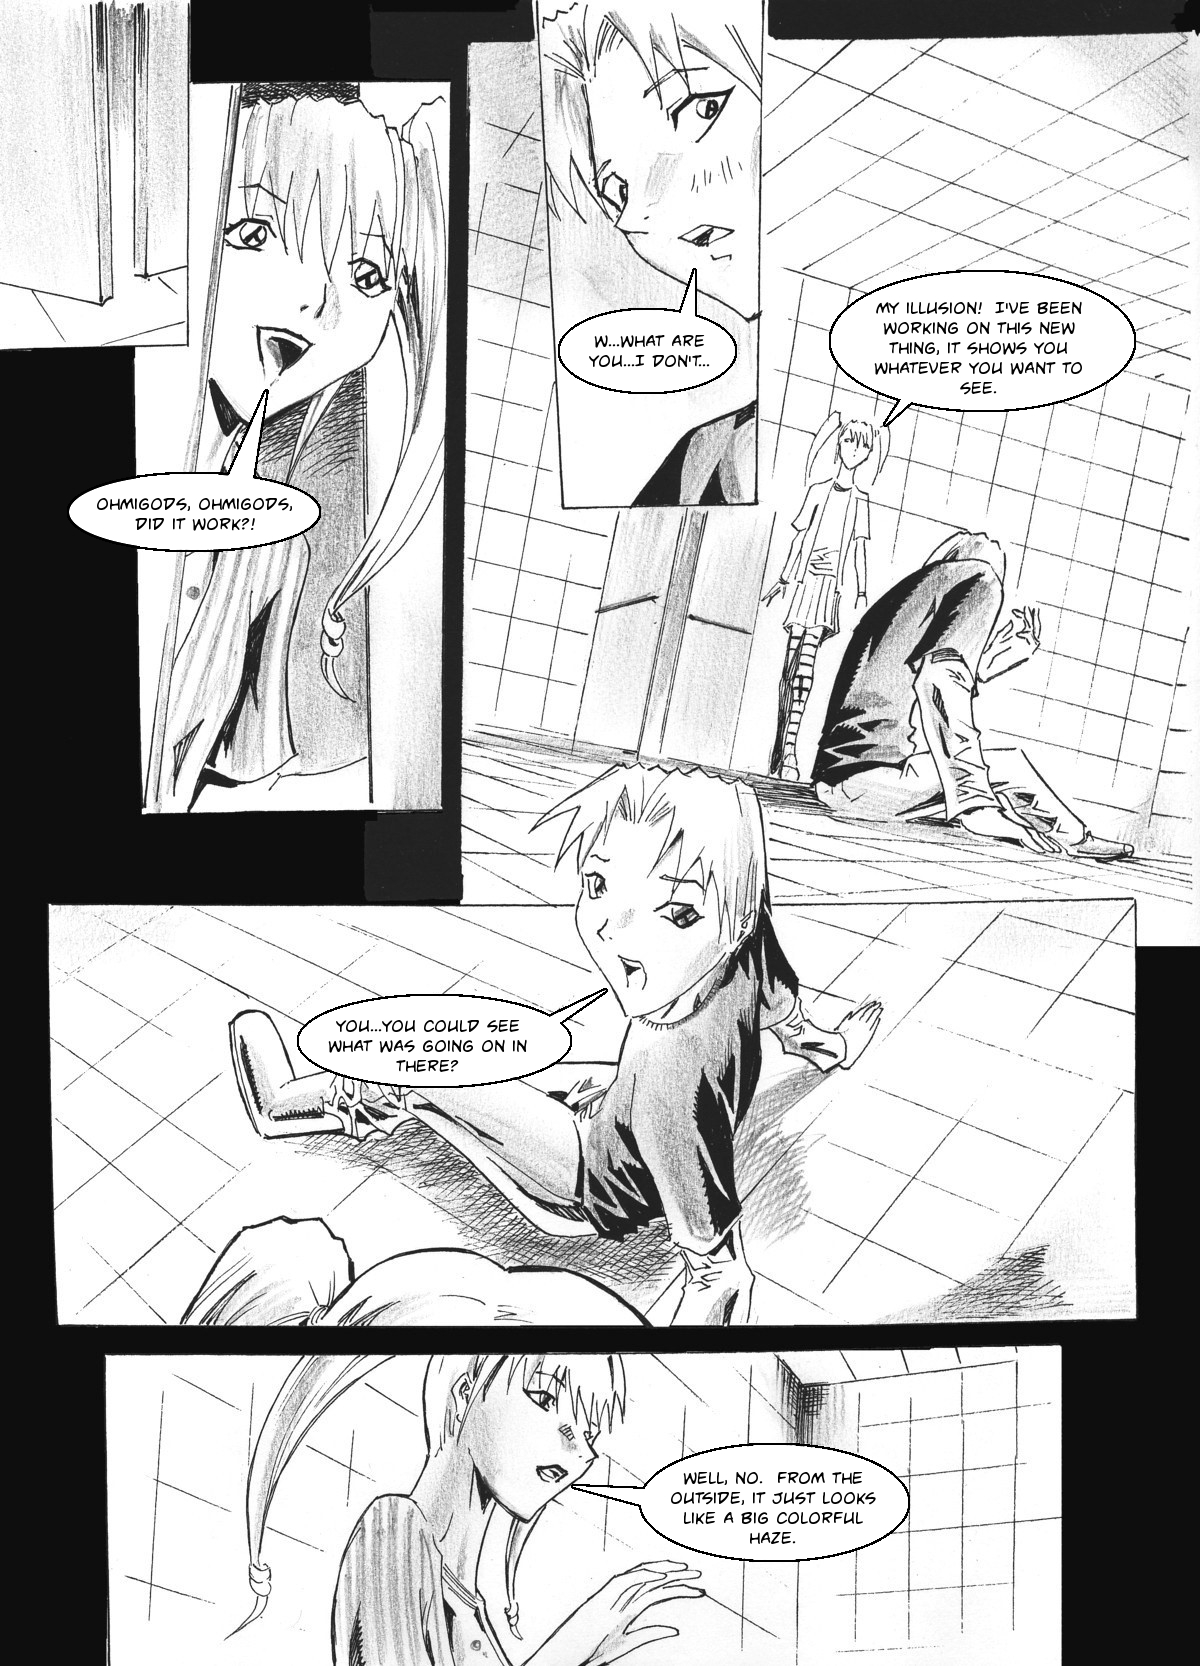 Zokusho: Some Enchanted Evening–Page 20